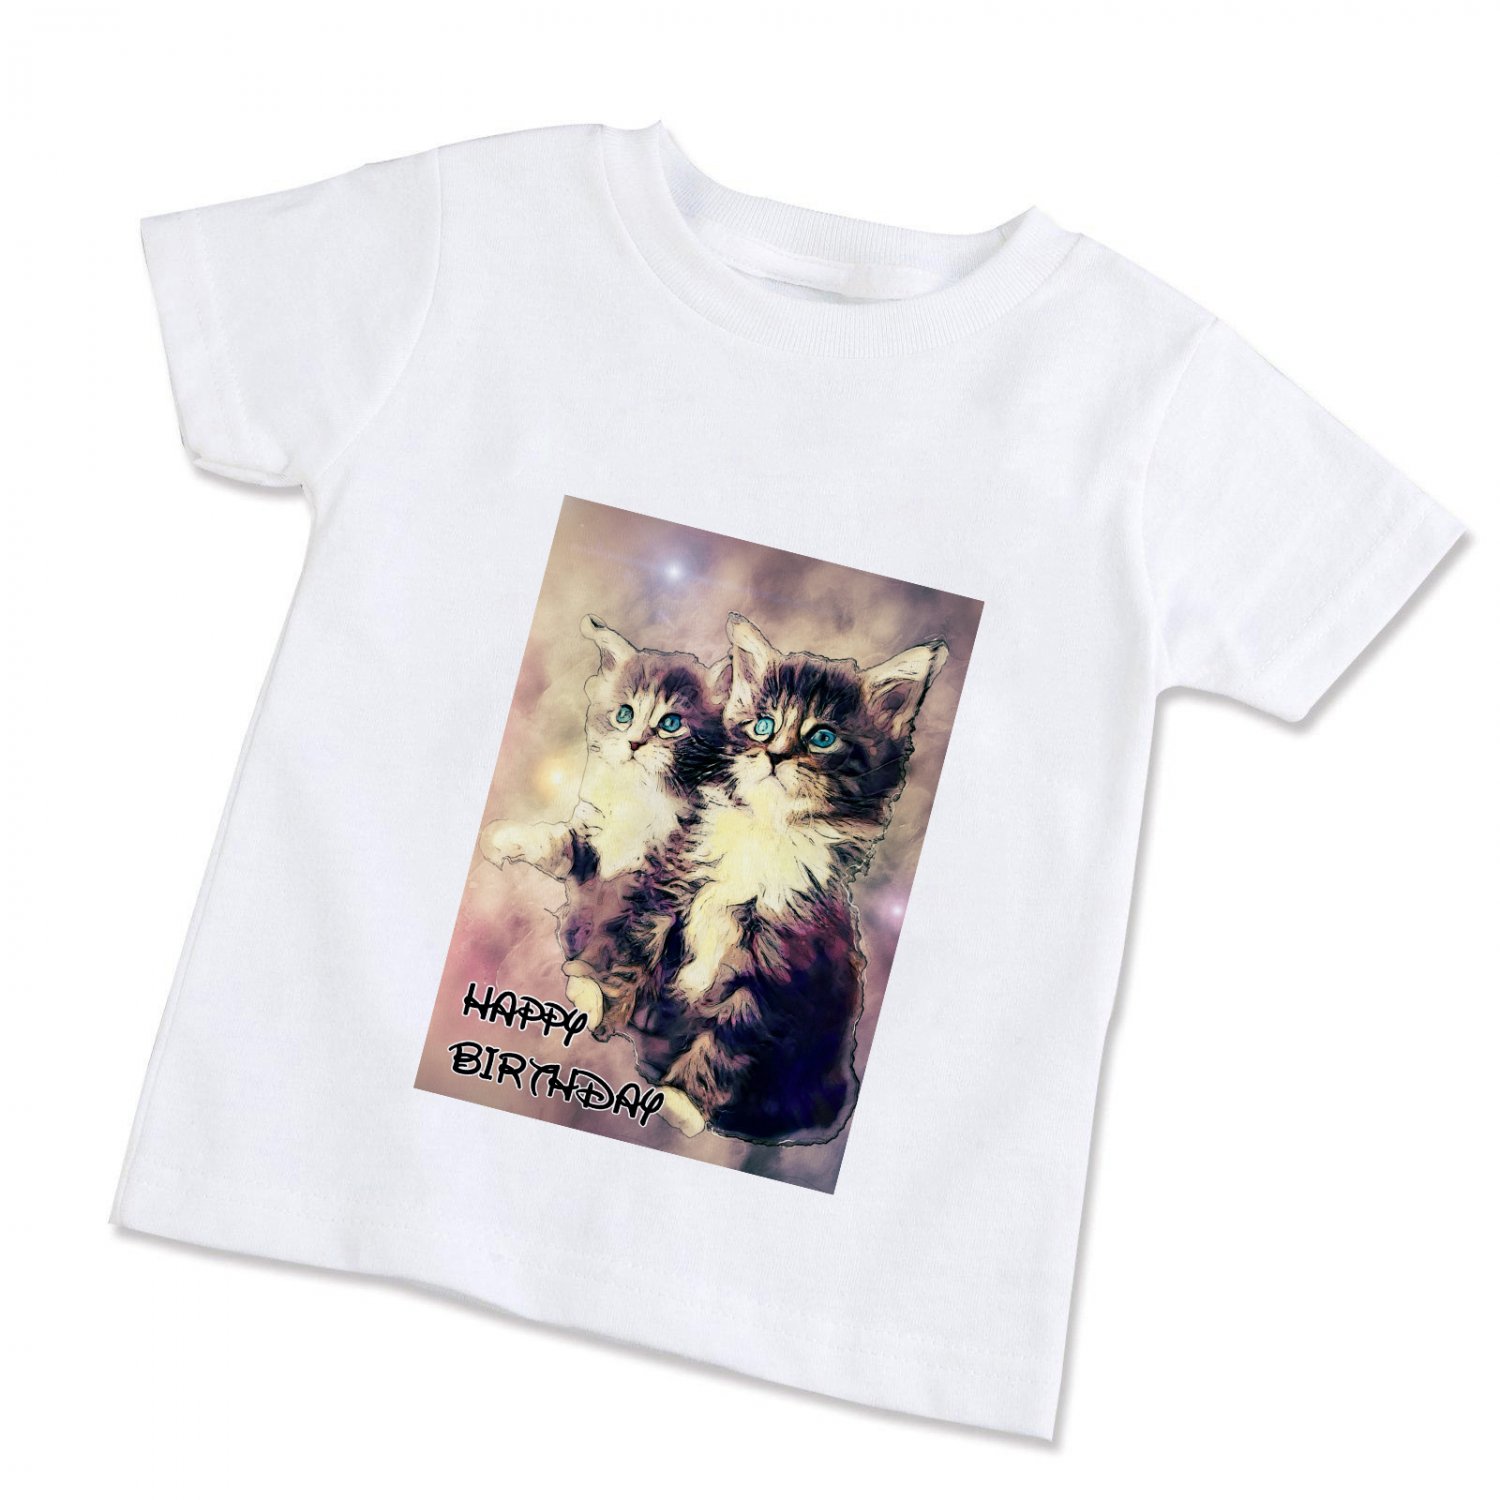 Happy Birthday Cat  Unisex Children T-Shirt (Available in XS/S/M/L)